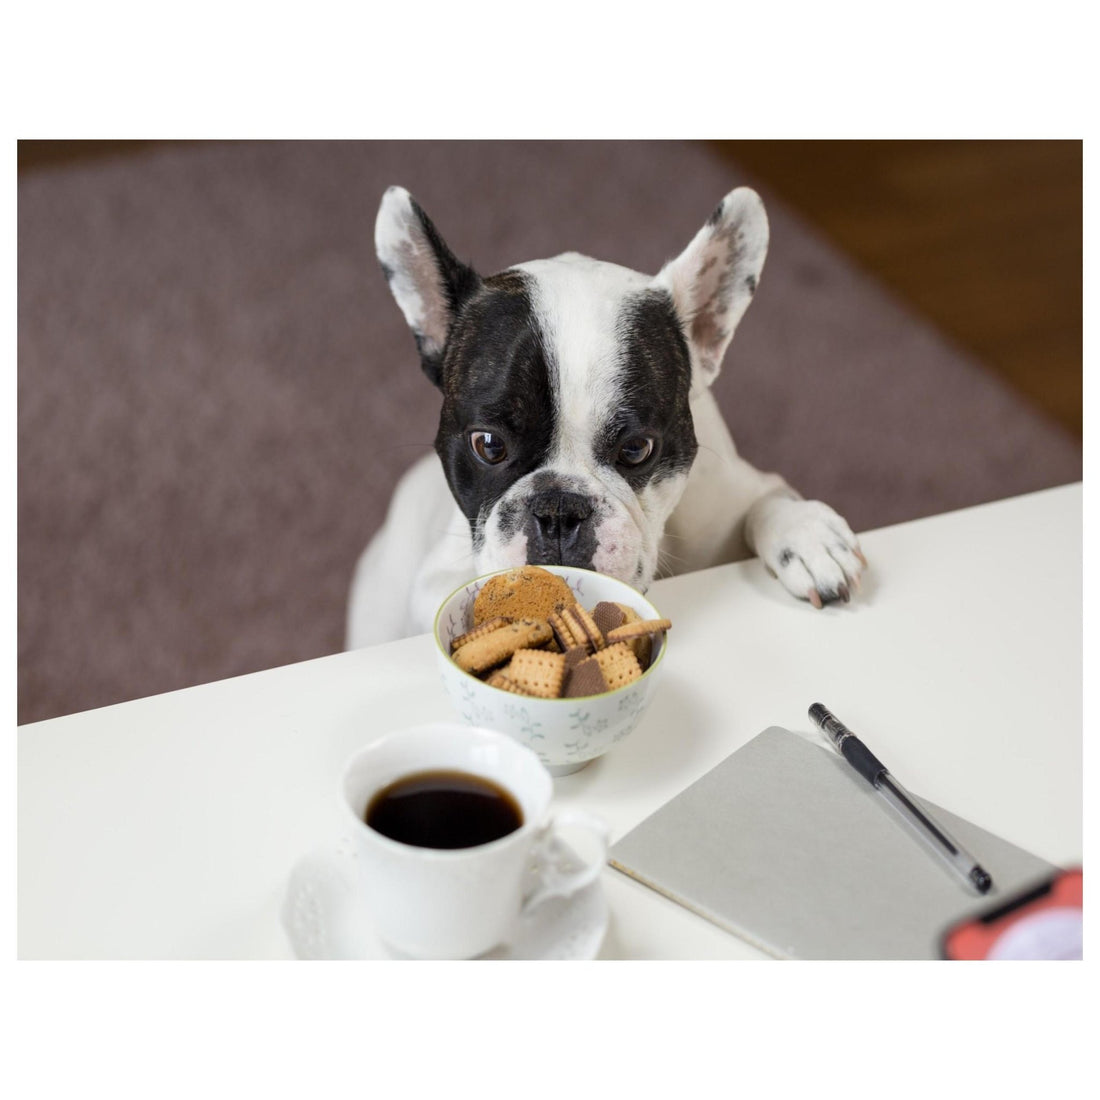 Human Foods That Dogs Can Eat - List Of Foods That Are Safe For Your Pooches! | Poochles India